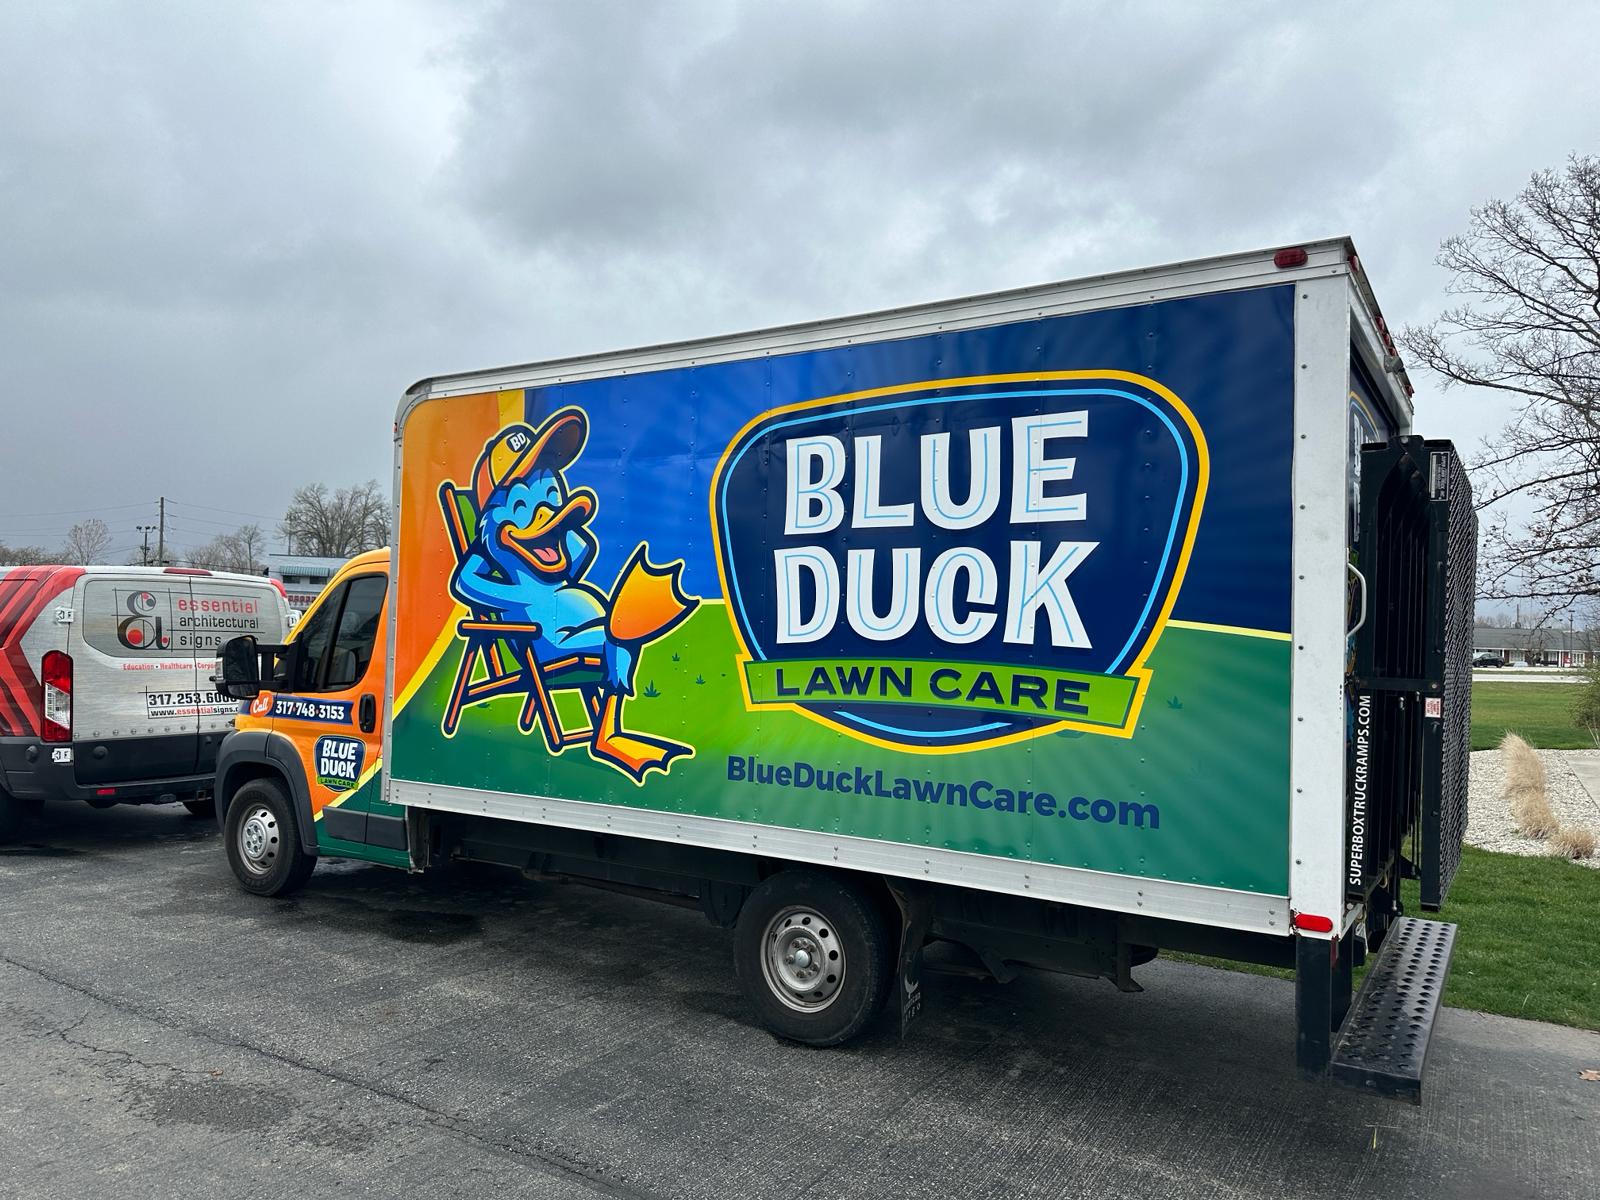 Rebranding for Growth: Green’s Lawncare & Property Services is now Blue Duck Lawn Care